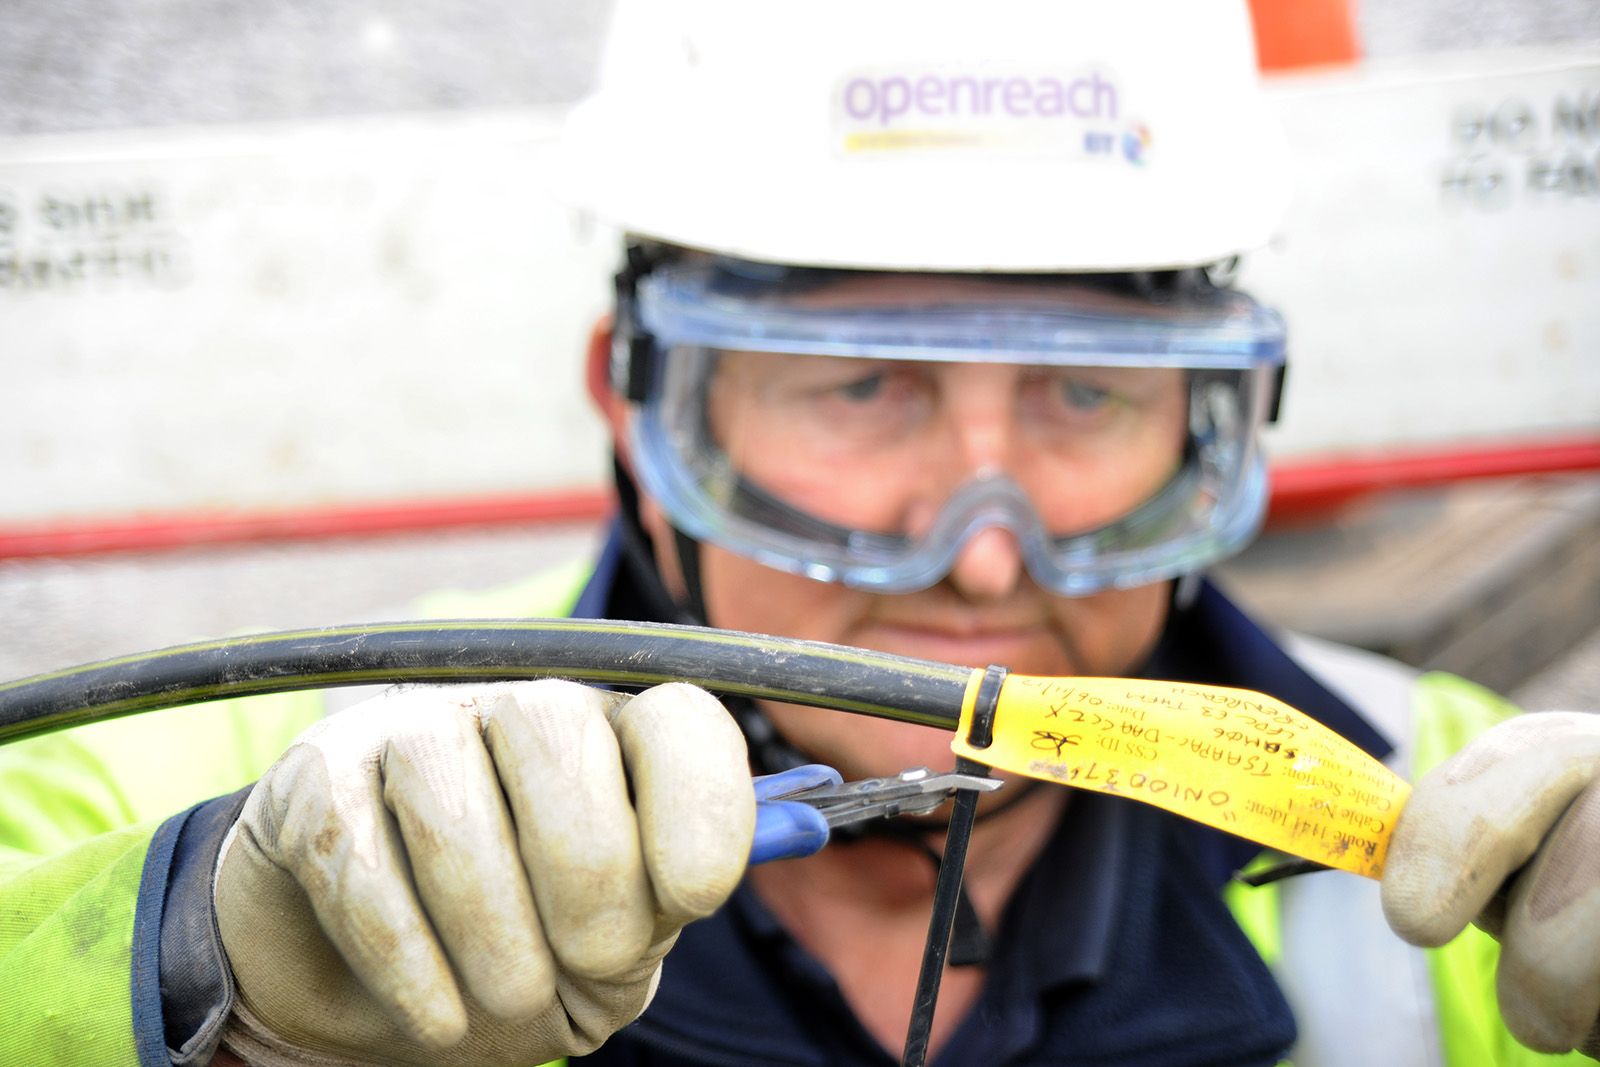 bt hopes to offer 500mbps broadband to most uk homes starts trial soon image 1